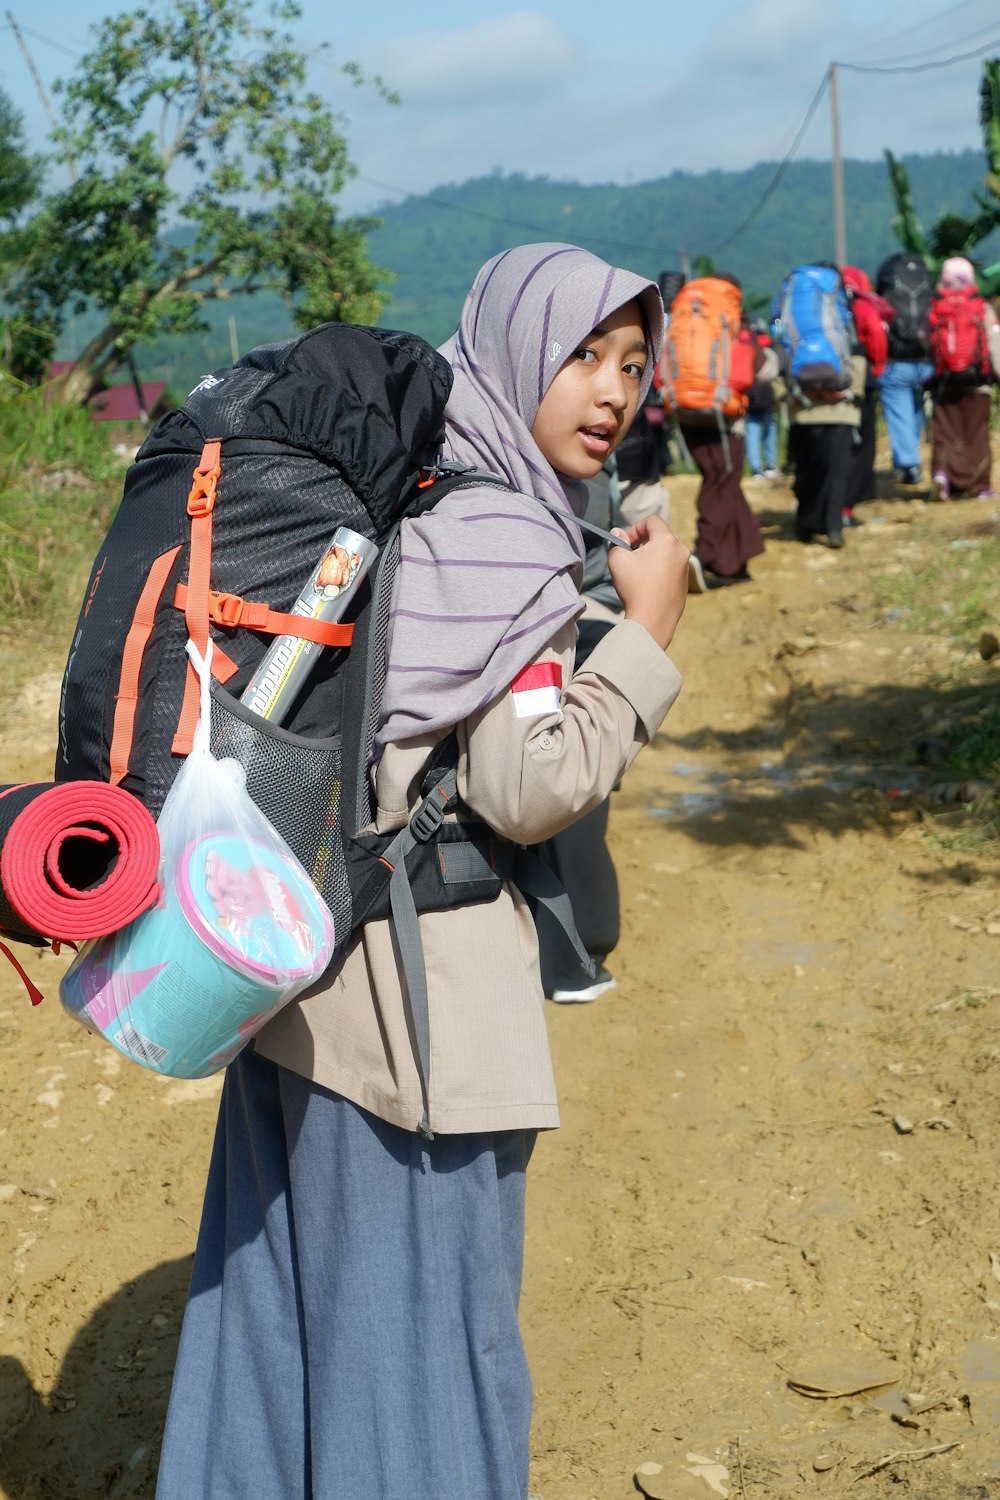 woman wearing gray headscarf carrying black backpack